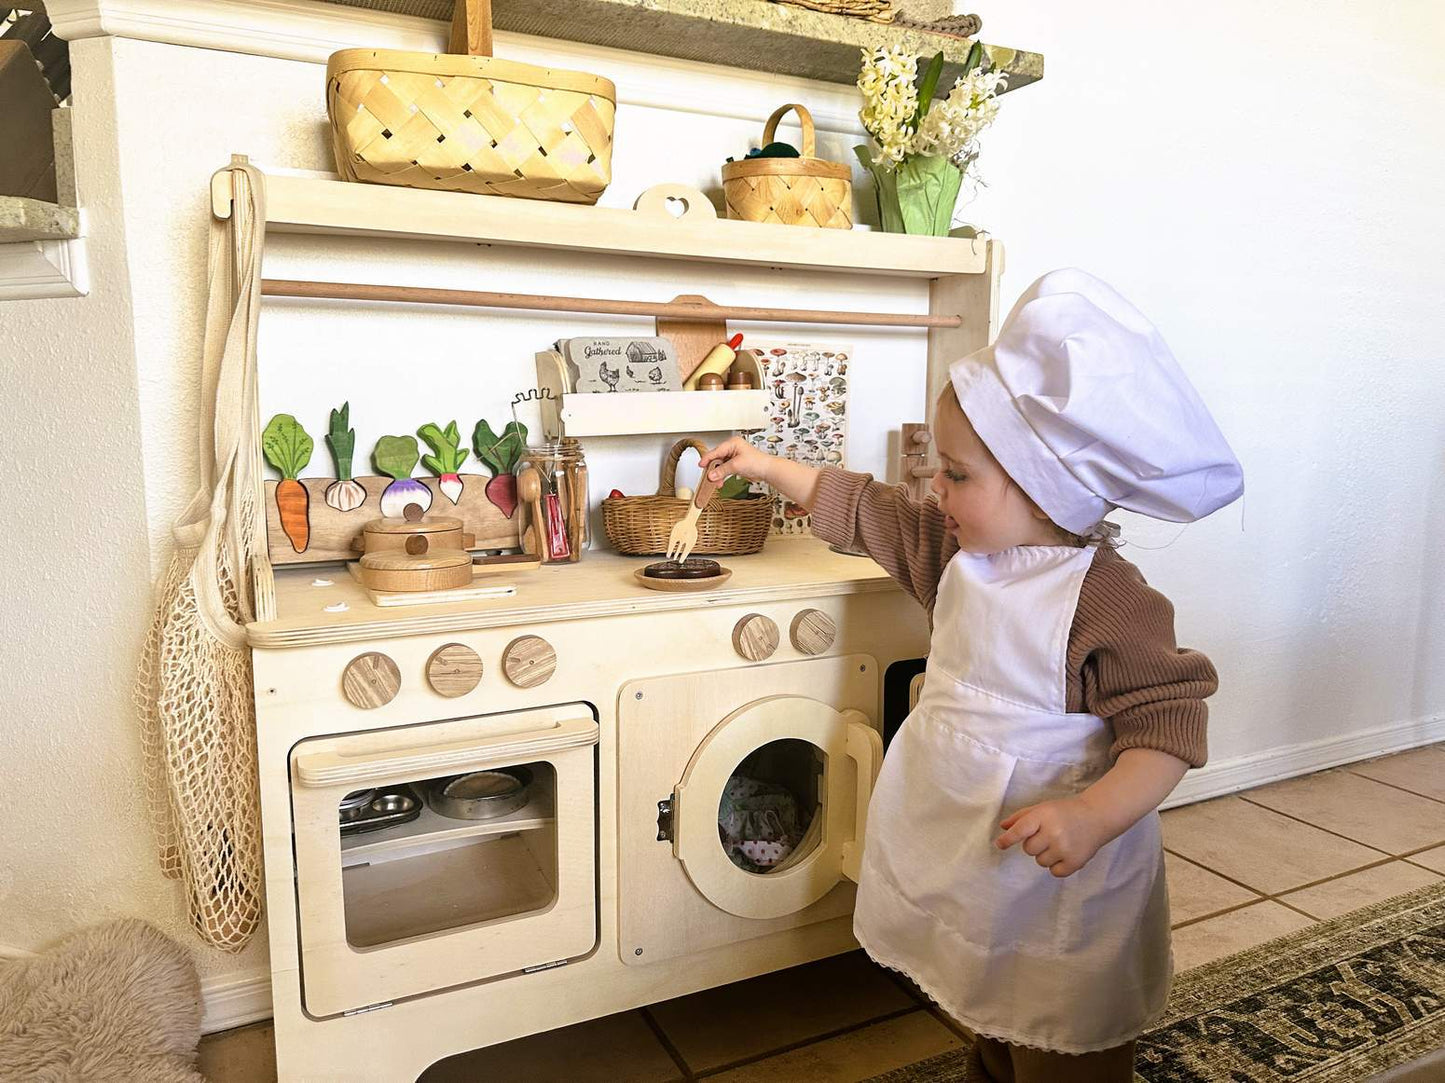 Wooden Play Kitchen Customizable Natural Wood